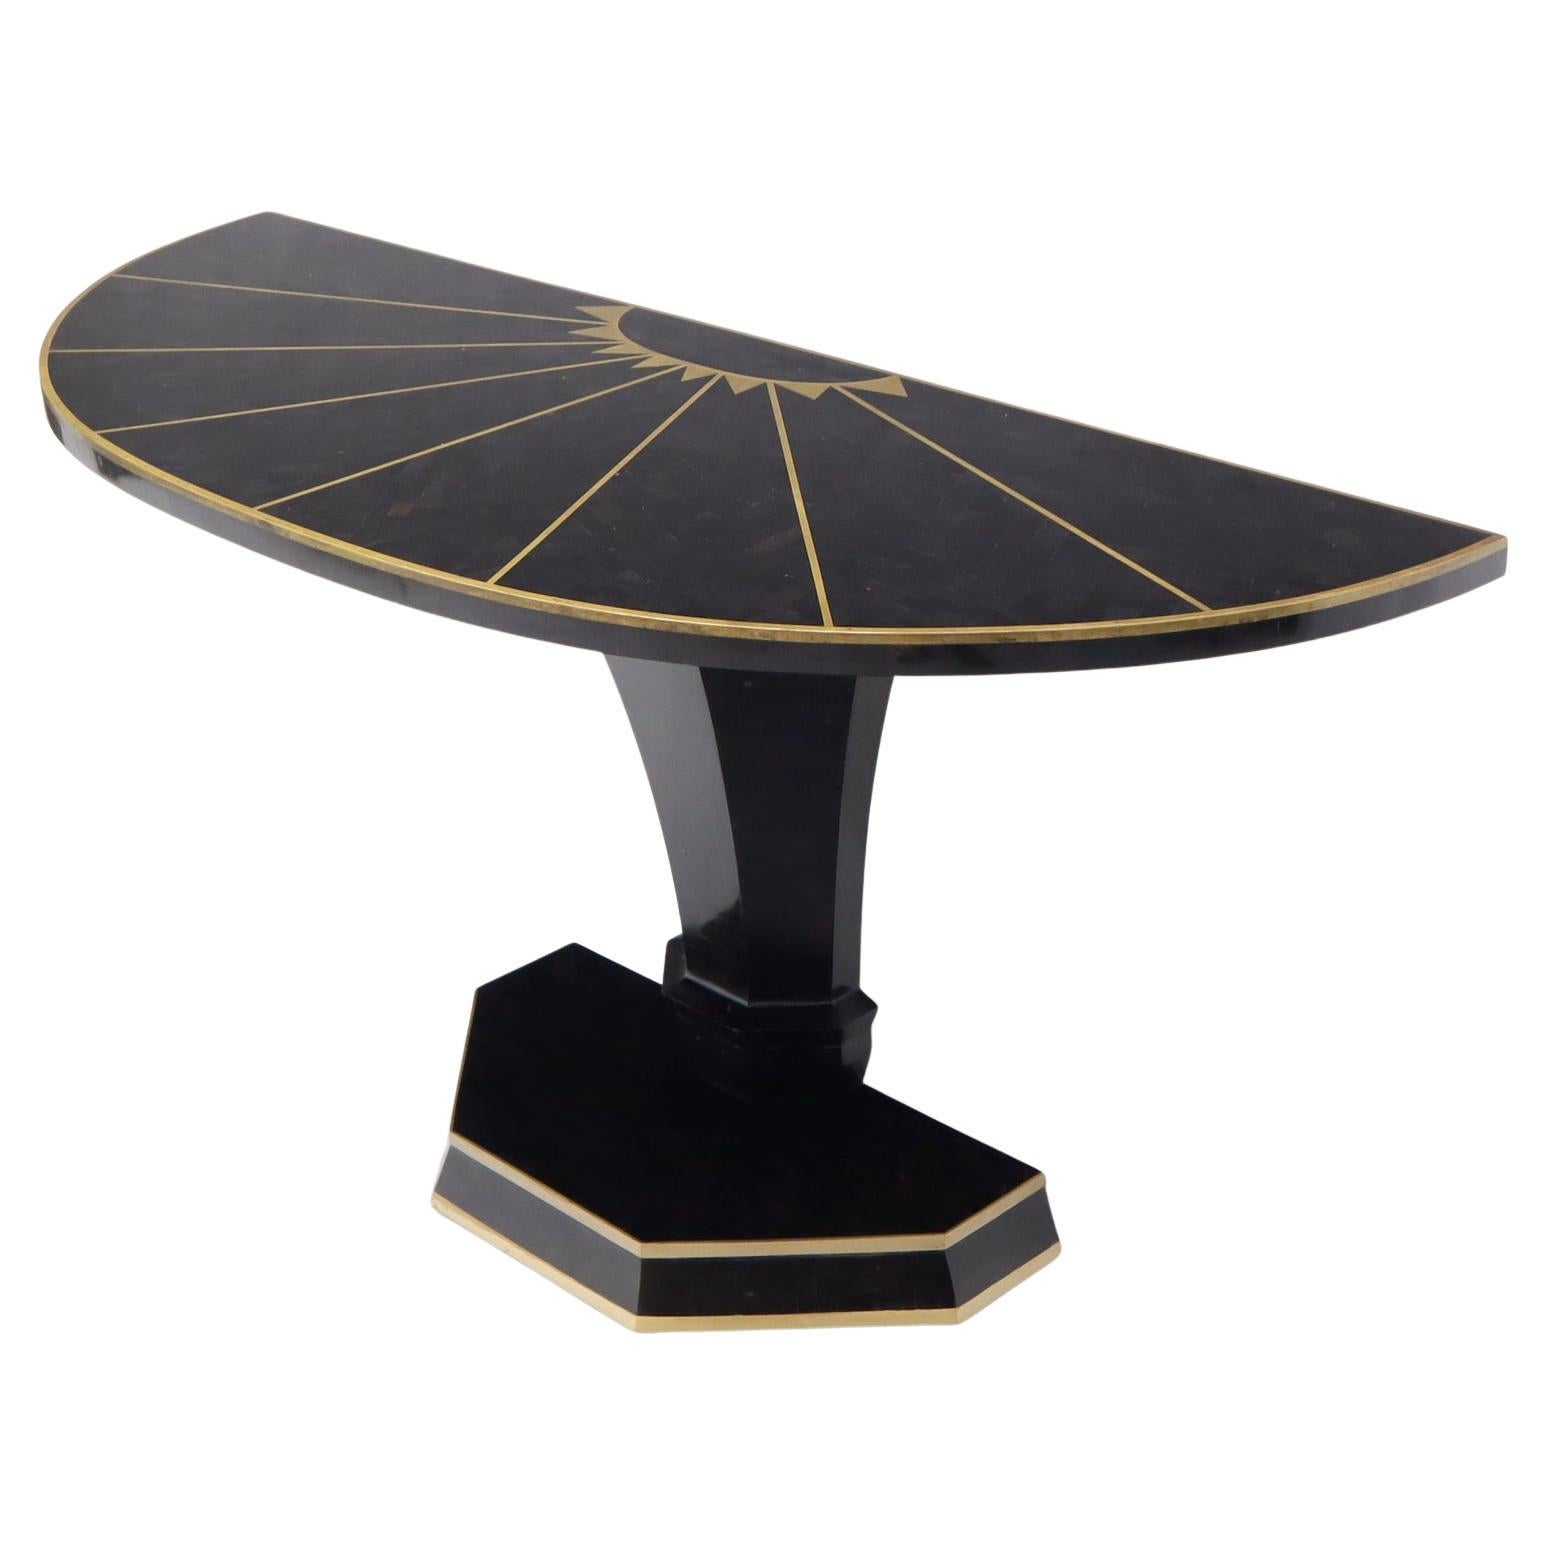 Demi Lune Tessellated Black Onyx or Marble Brass Inlay Console Table